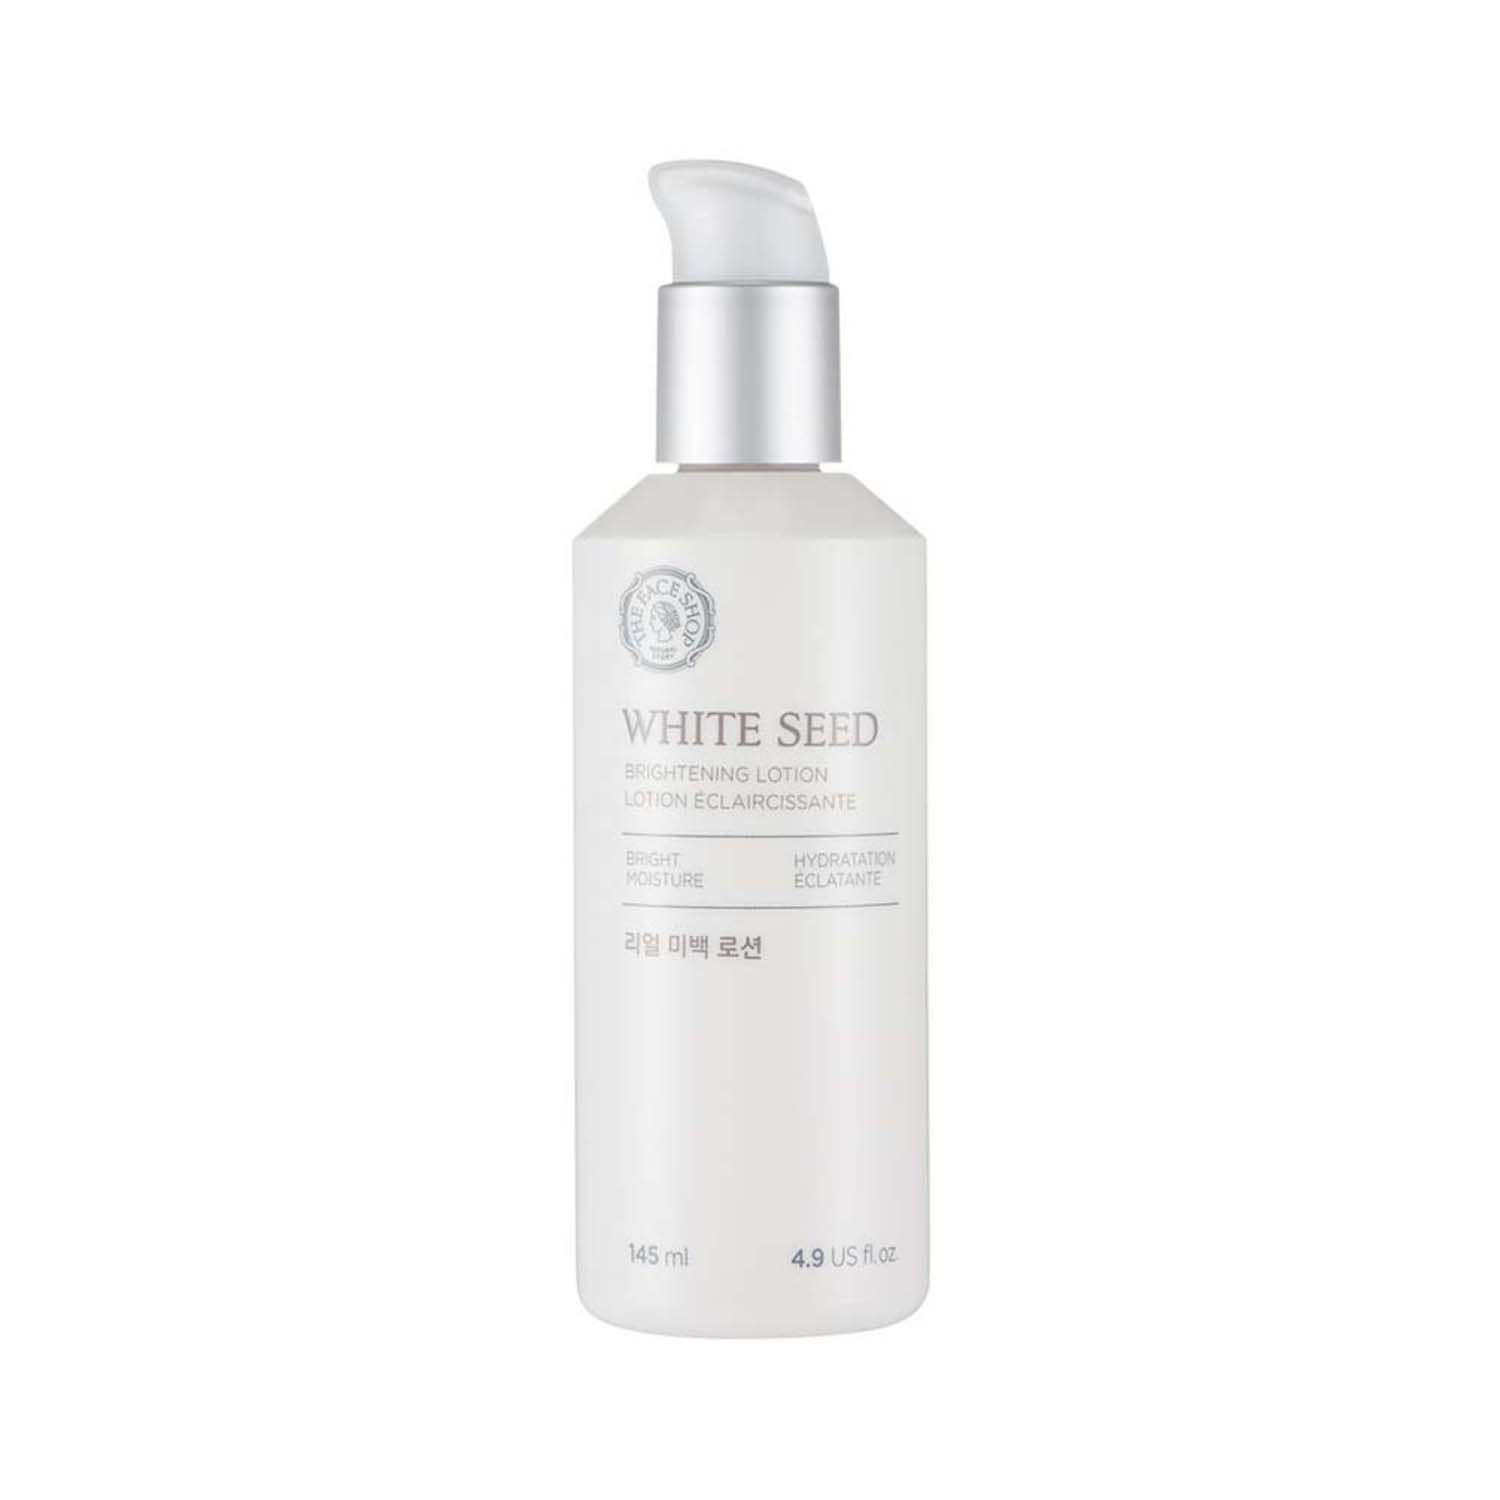 The Face Shop White Seed Brightening Lotion (145ml)